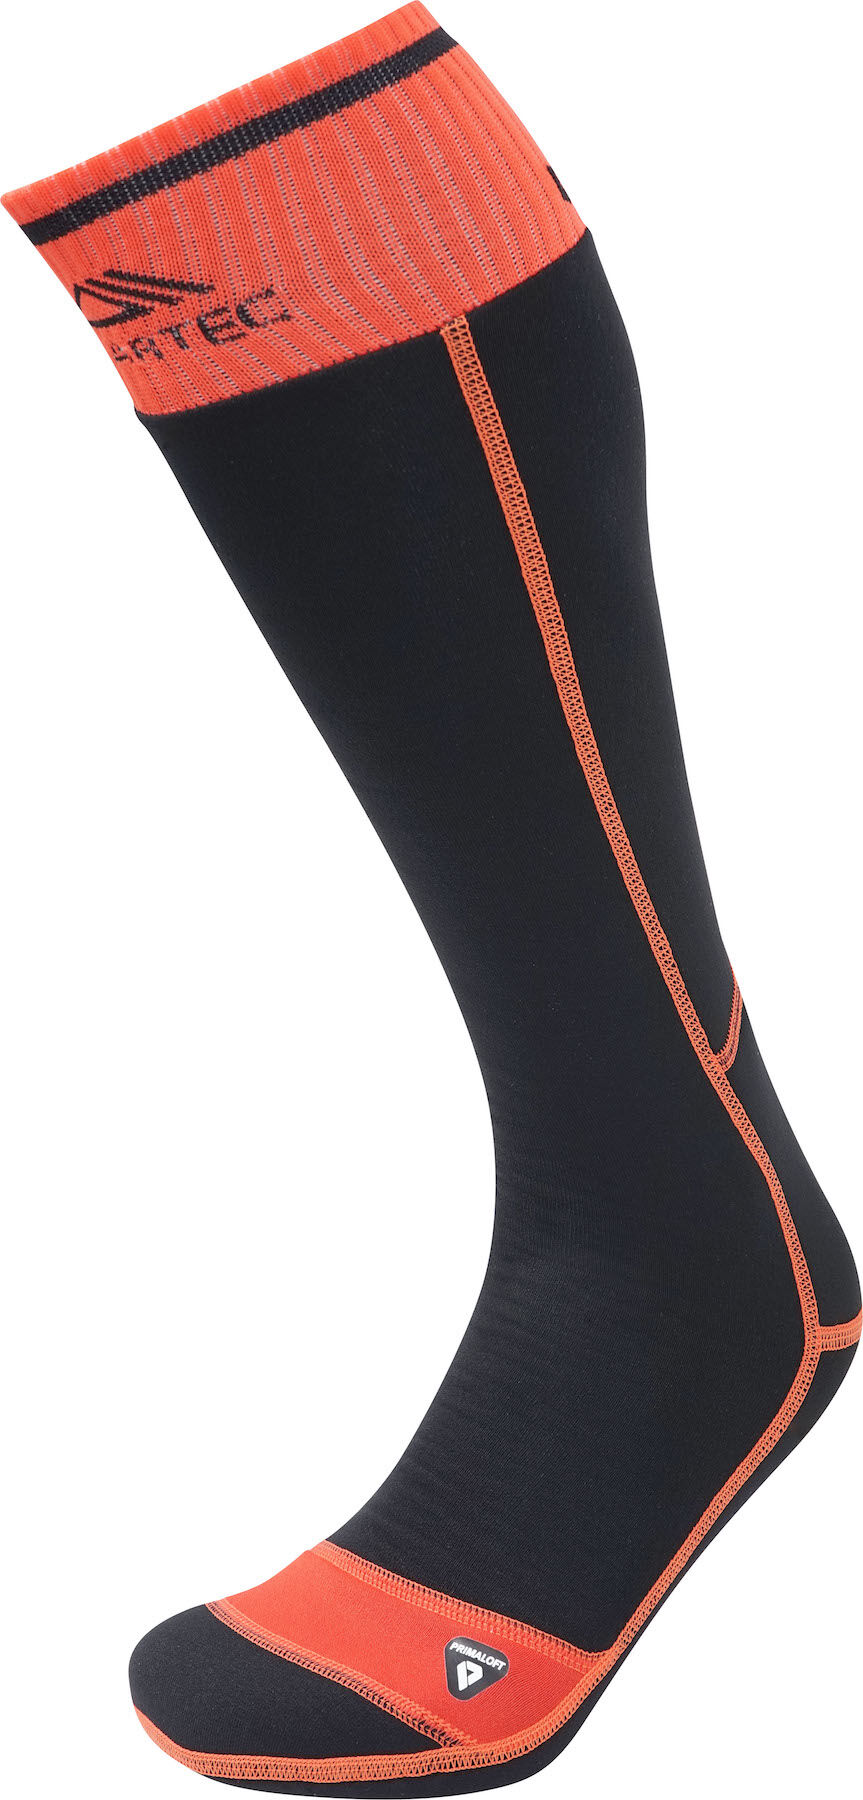 Lorpen - T3+ Inferno Expedition Polartec - Hiking socks